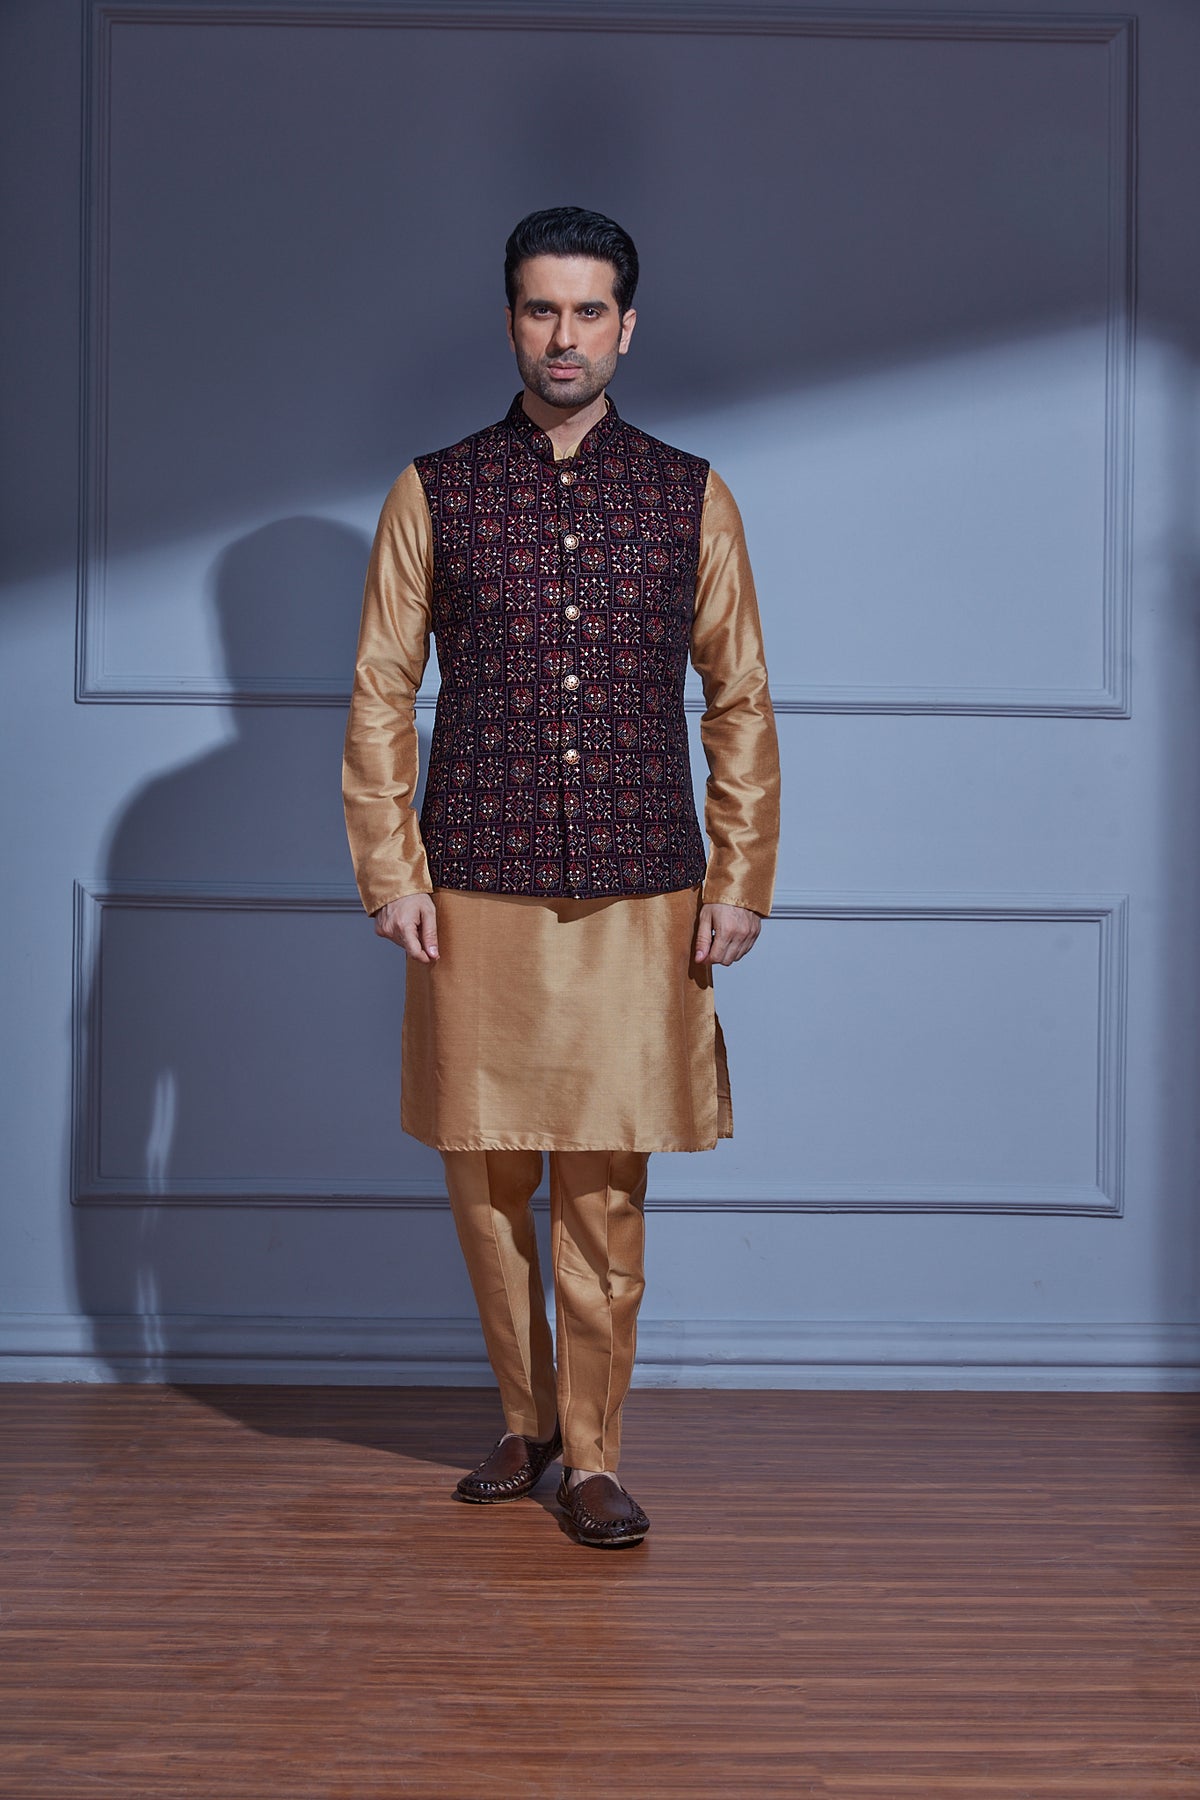 DARK WINE VELVET JACKET WITH ALL OVER EMBROIDERY AND SOLID GOLD KURTA SET